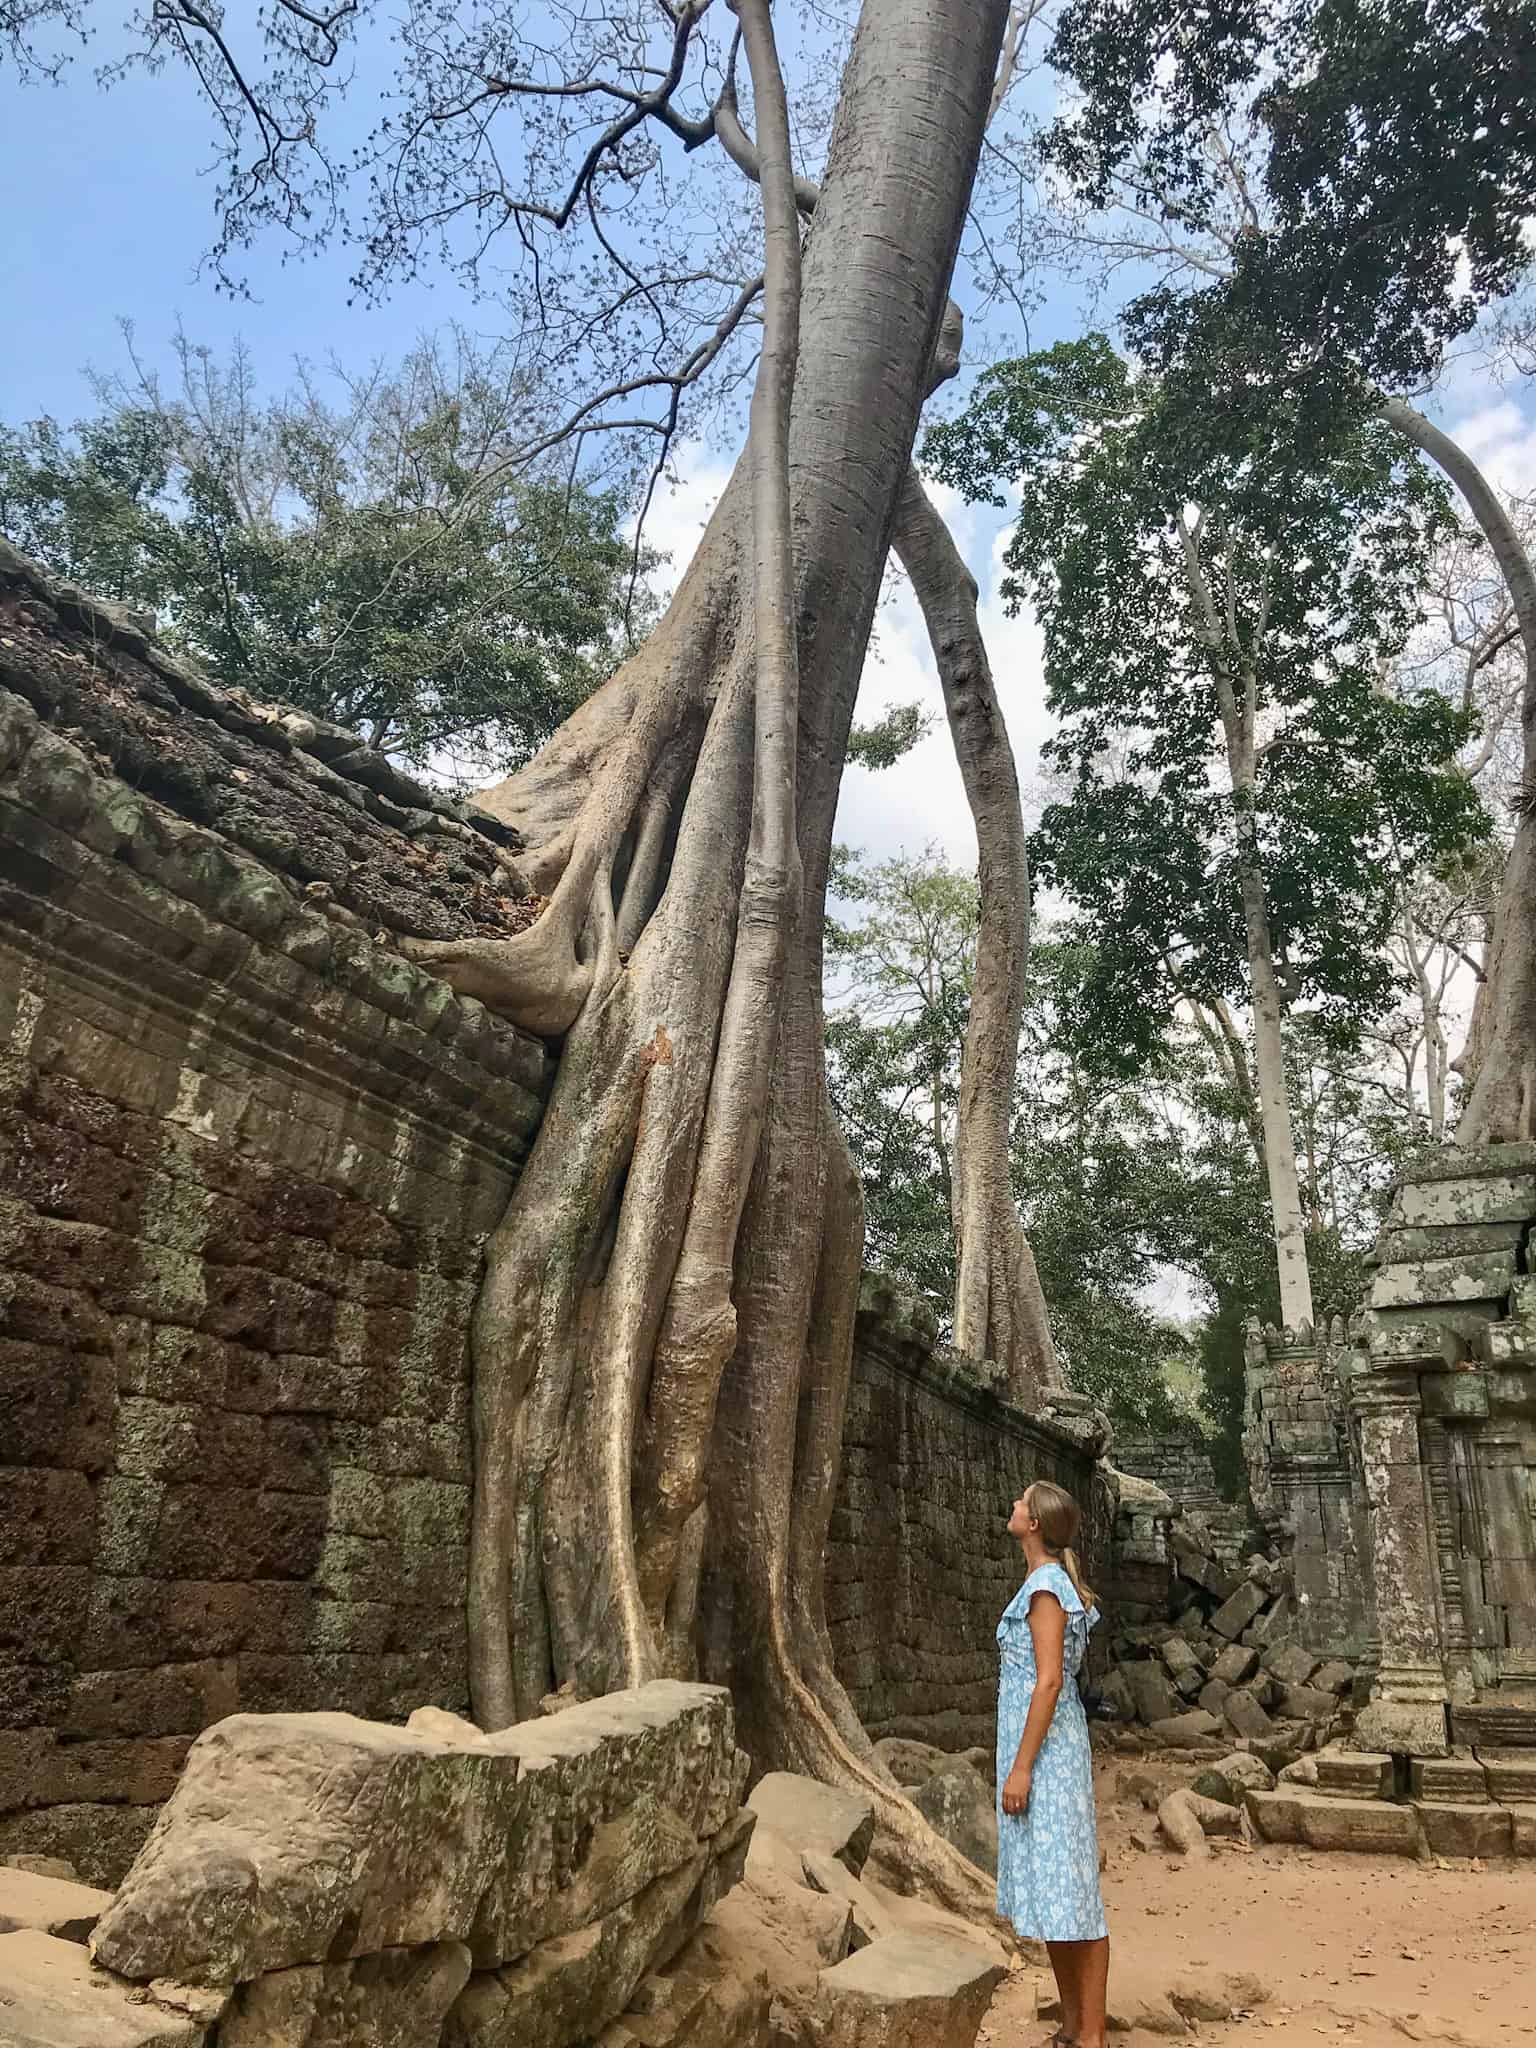 Joannda standing by massive tree growing at Ta Prohm temple in Angkor Wat Siem Reap Cambodia